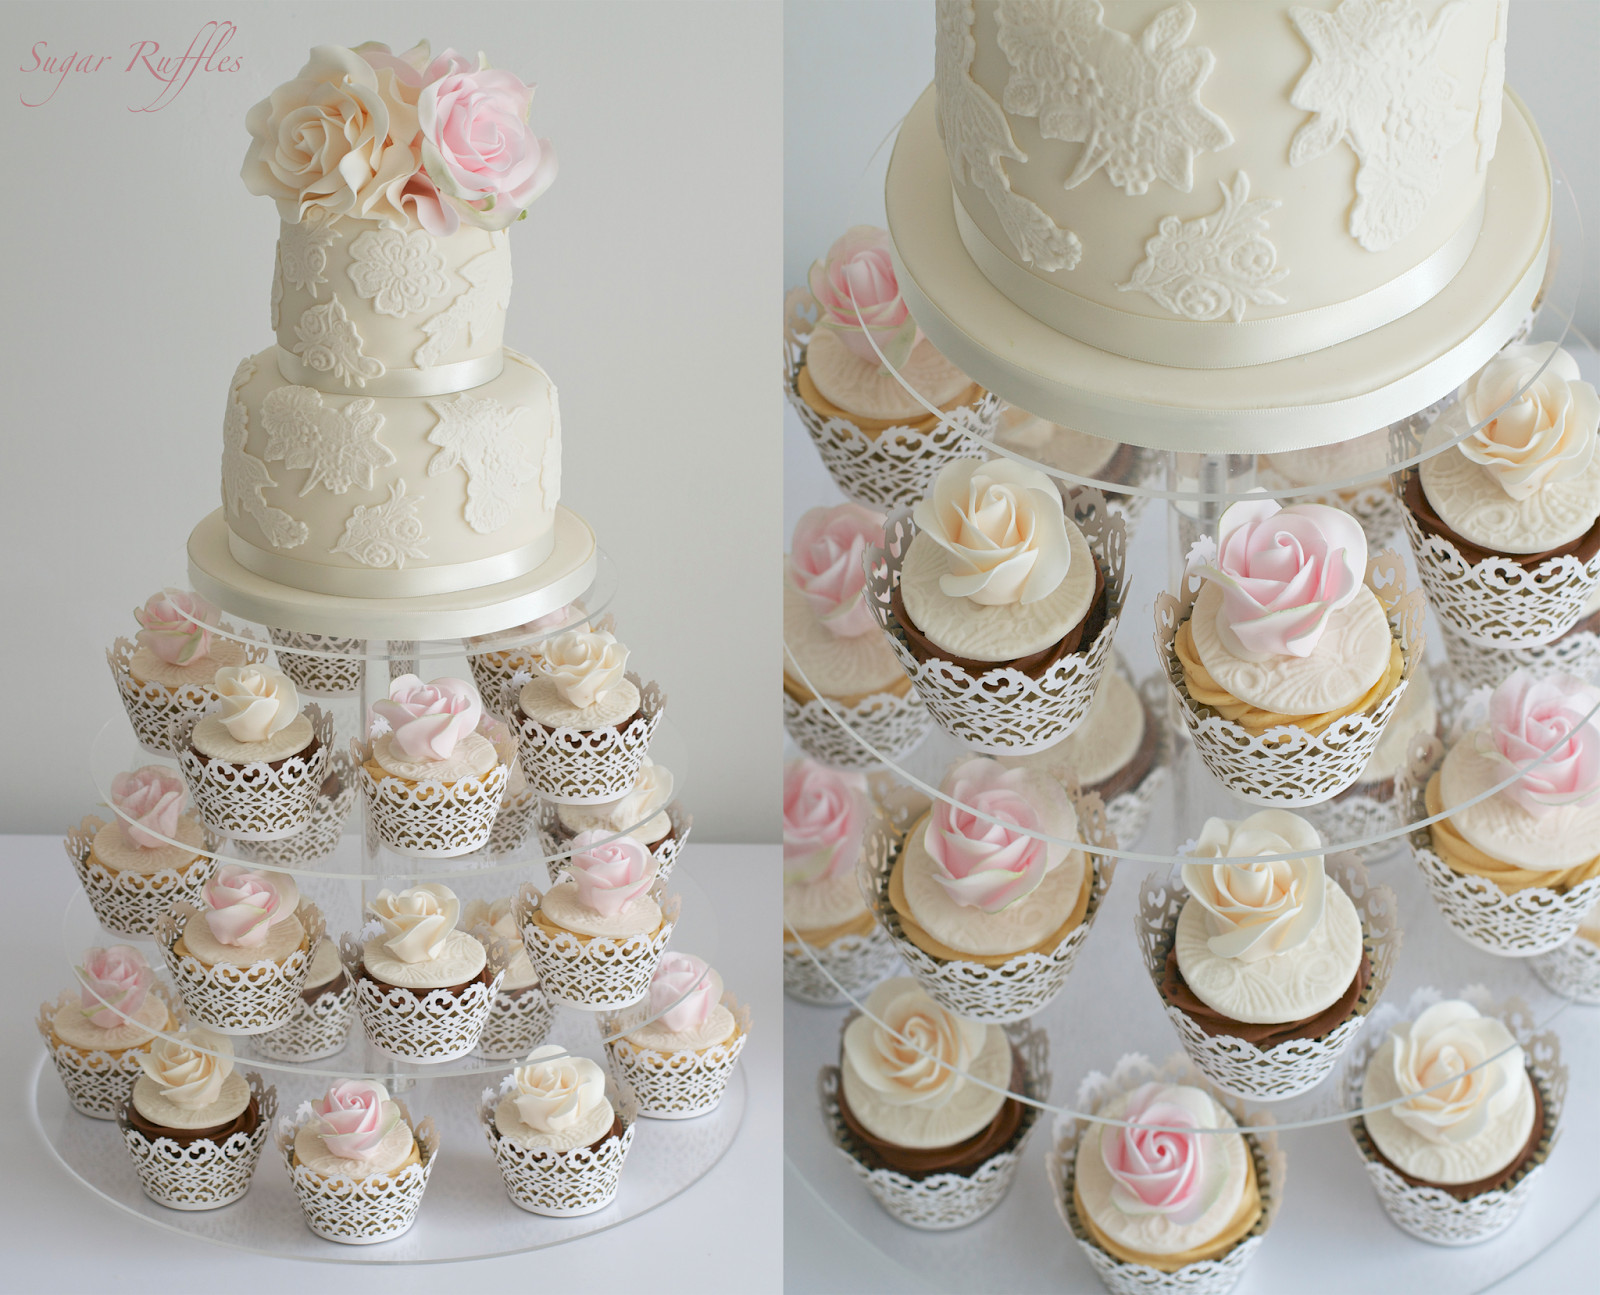 Wedding Cup Cakes Pictures
 Sugar Ruffles Elegant Wedding Cakes Barrow in Furness